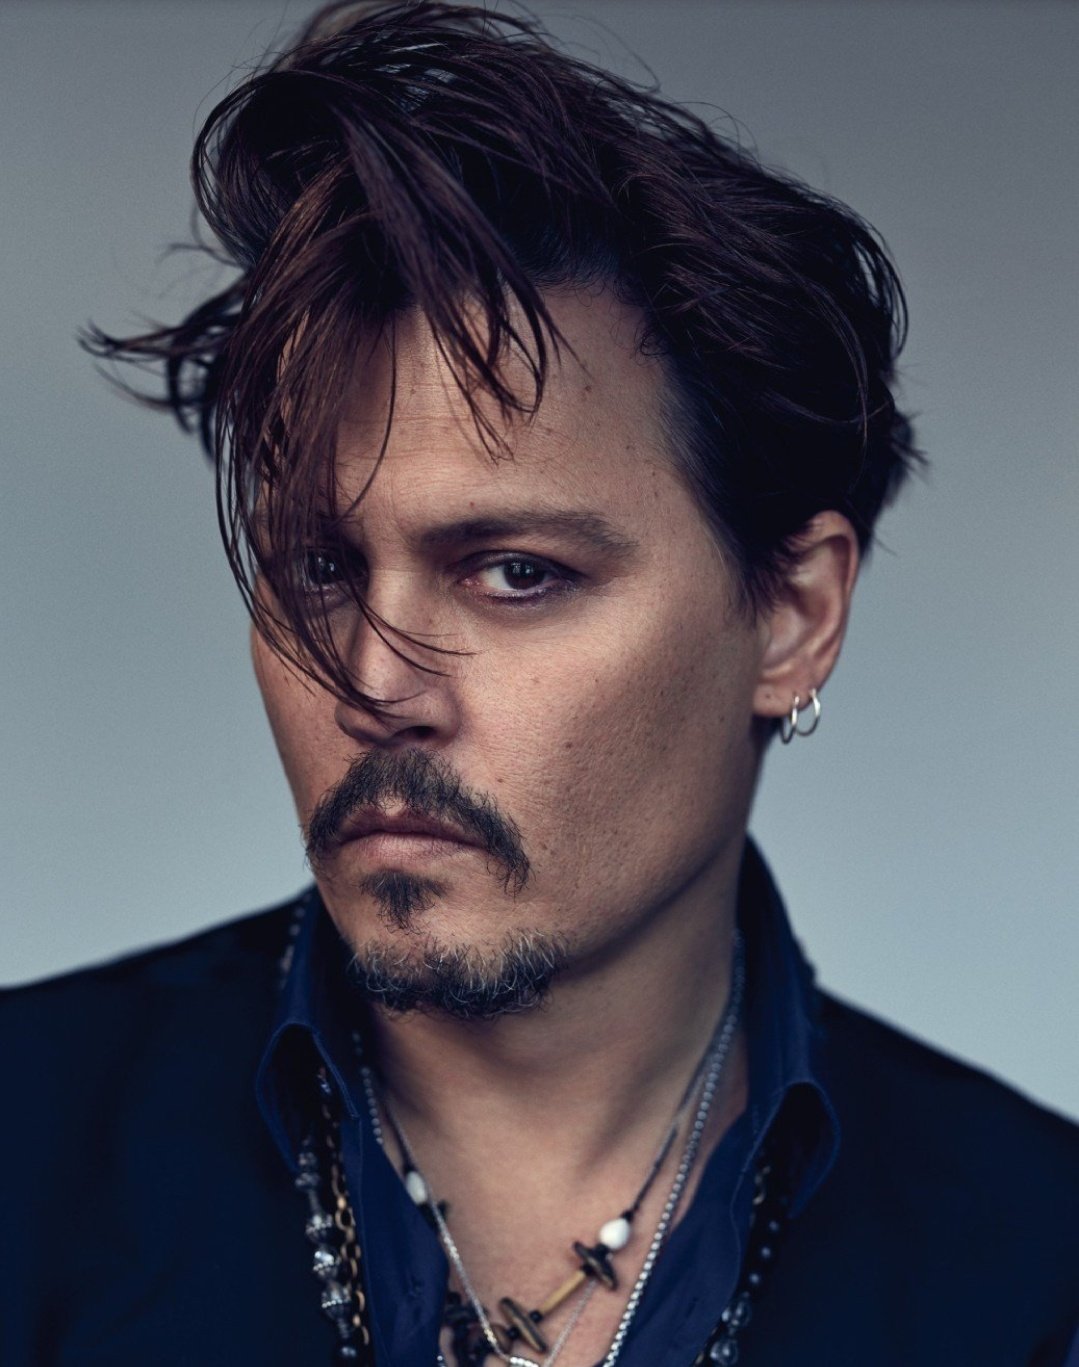 Johnny Depp Sauvage Dior Ad Hair Tutorial - TheSalonGuy - YouTube